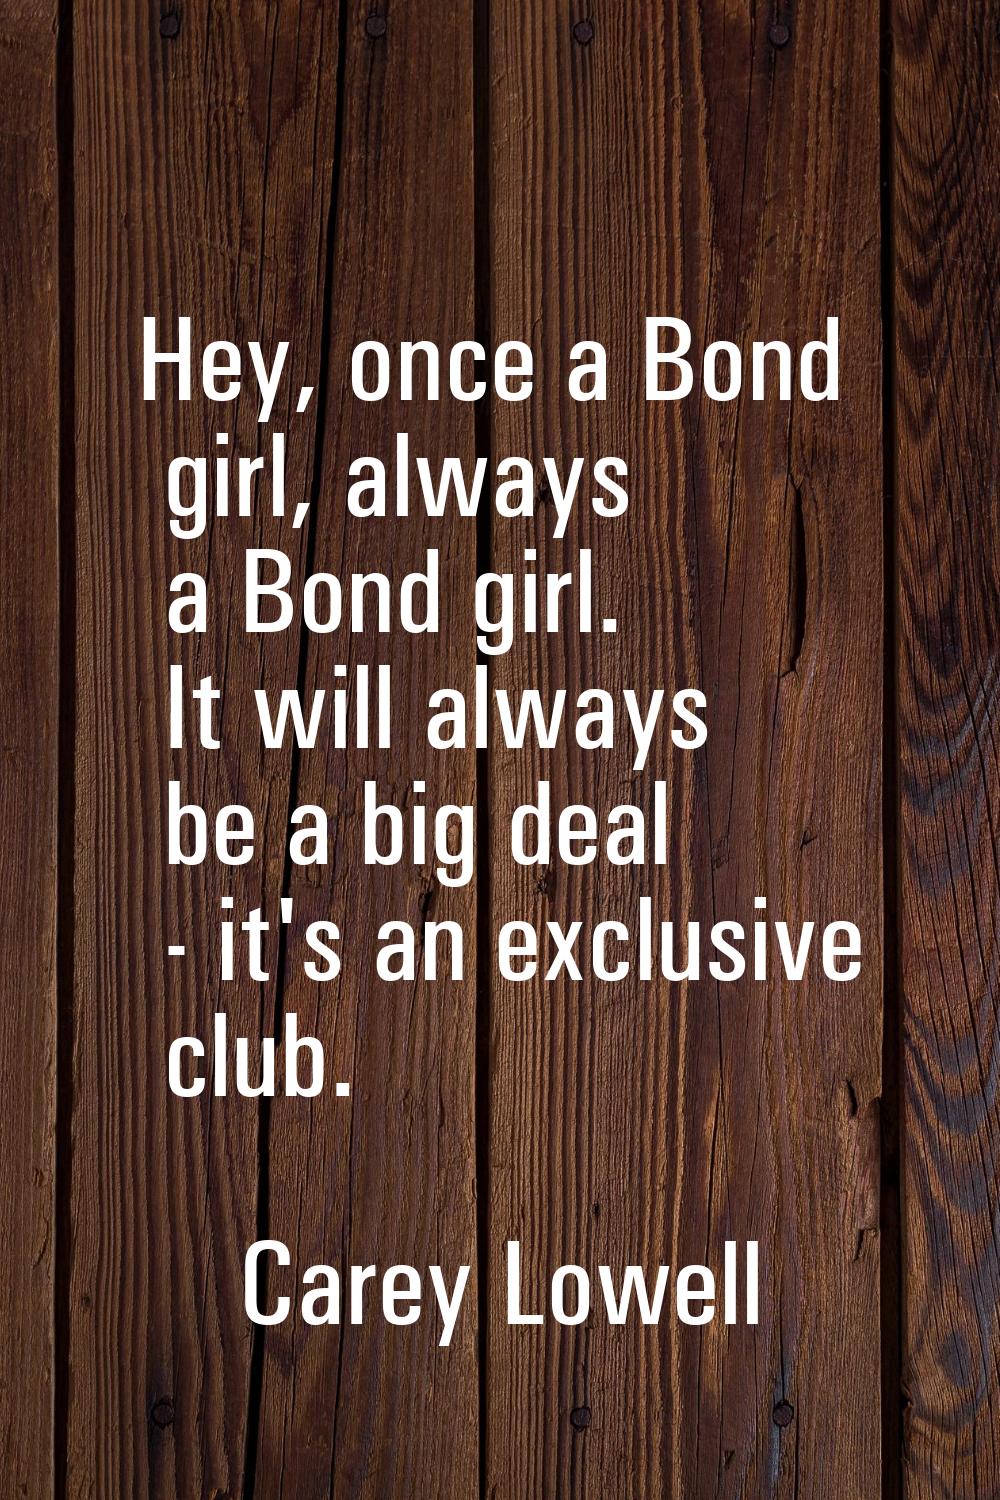 Hey, once a Bond girl, always a Bond girl. It will always be a big deal - it's an exclusive club.